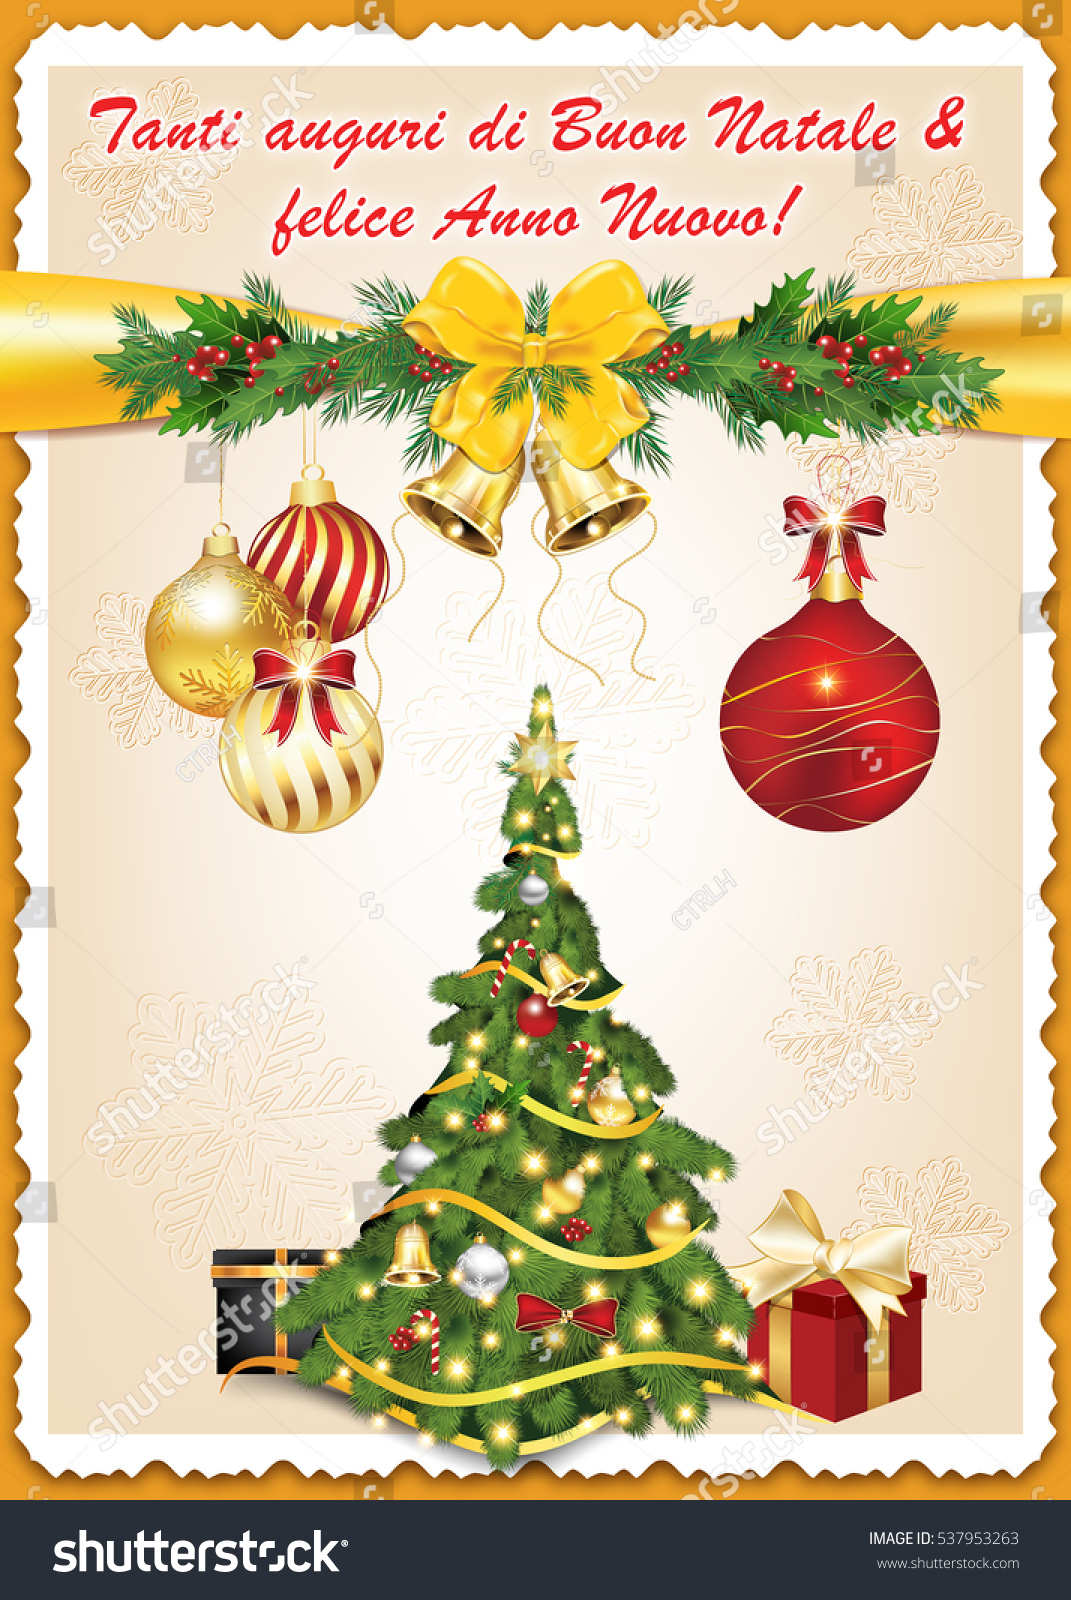 Buon Natale What Does It Mean.Italian Christmas Greetings In Italian Wbqaup Newyearonline Site